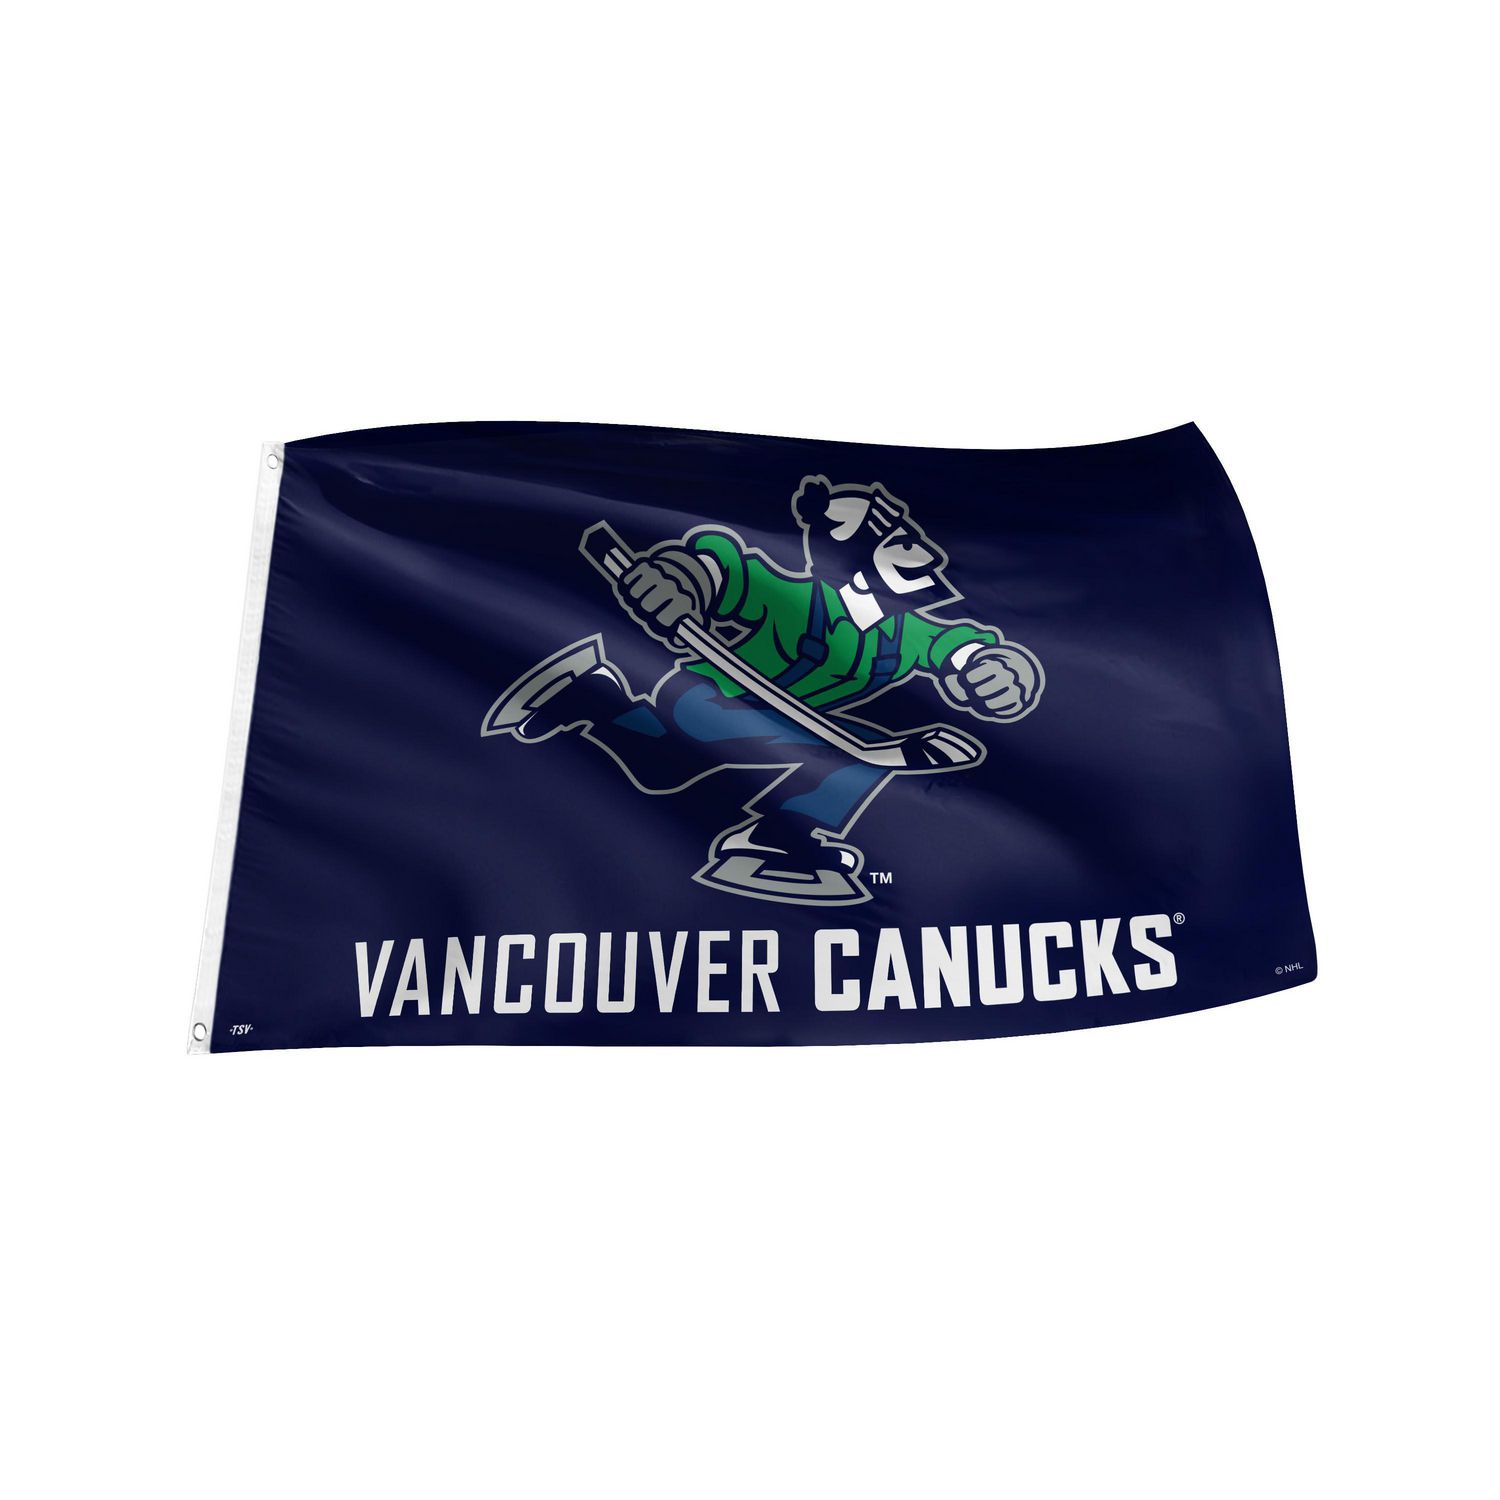 Vancouver Canucks' team store proudly displays Canucks-themed golf bag in  window